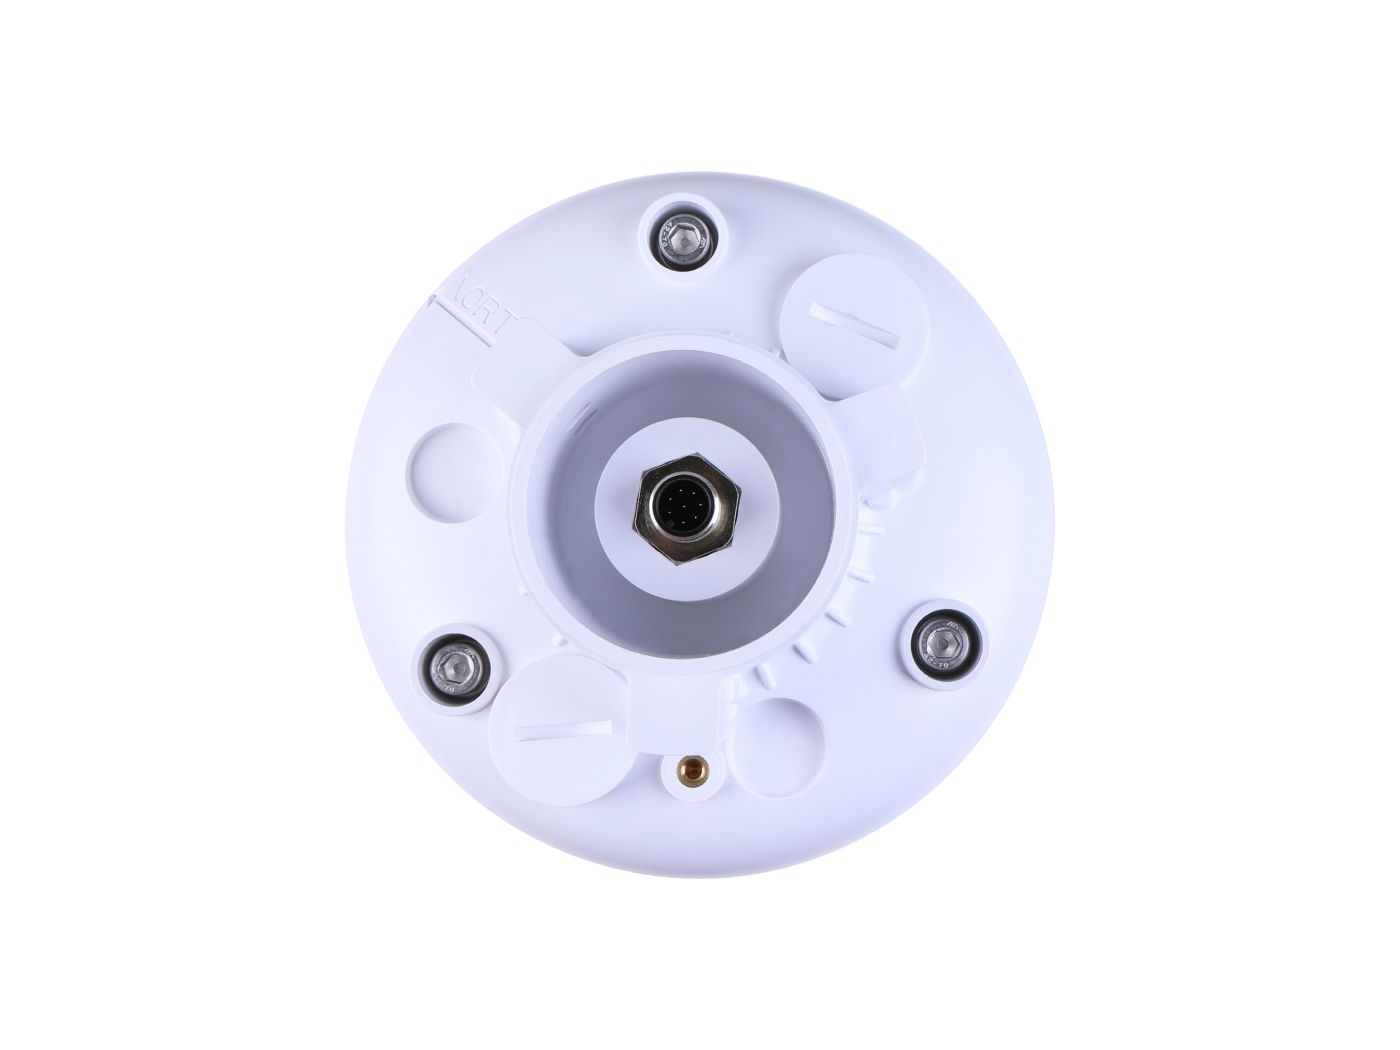 5-in-1 V2 Compact Weather Sensor - eucatech Store